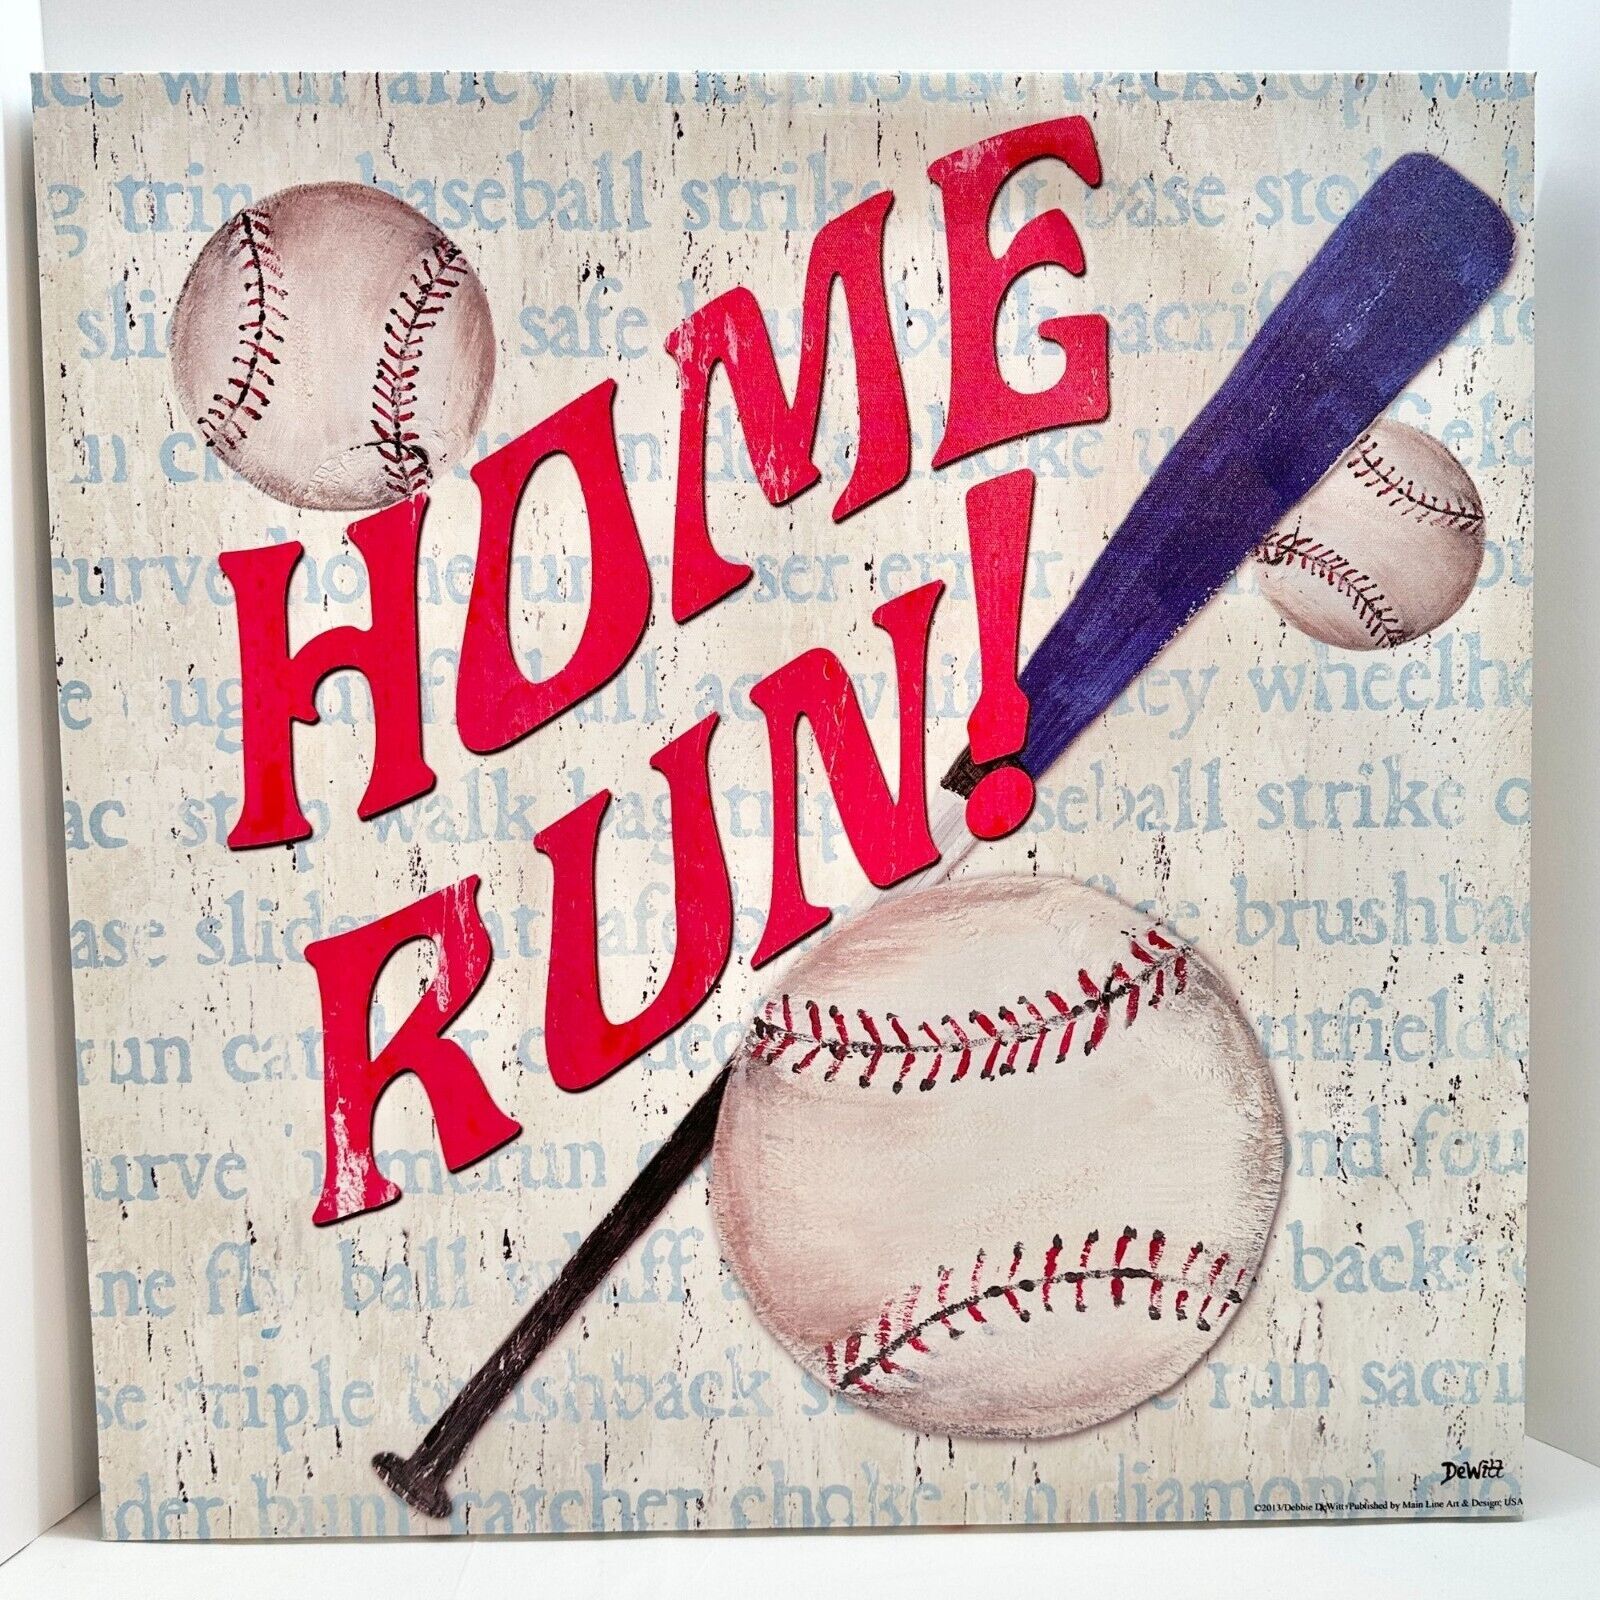 Kirkland's Hanging Picture 24 x 24 Red White Blue Baseball Theme NEW - $11.88